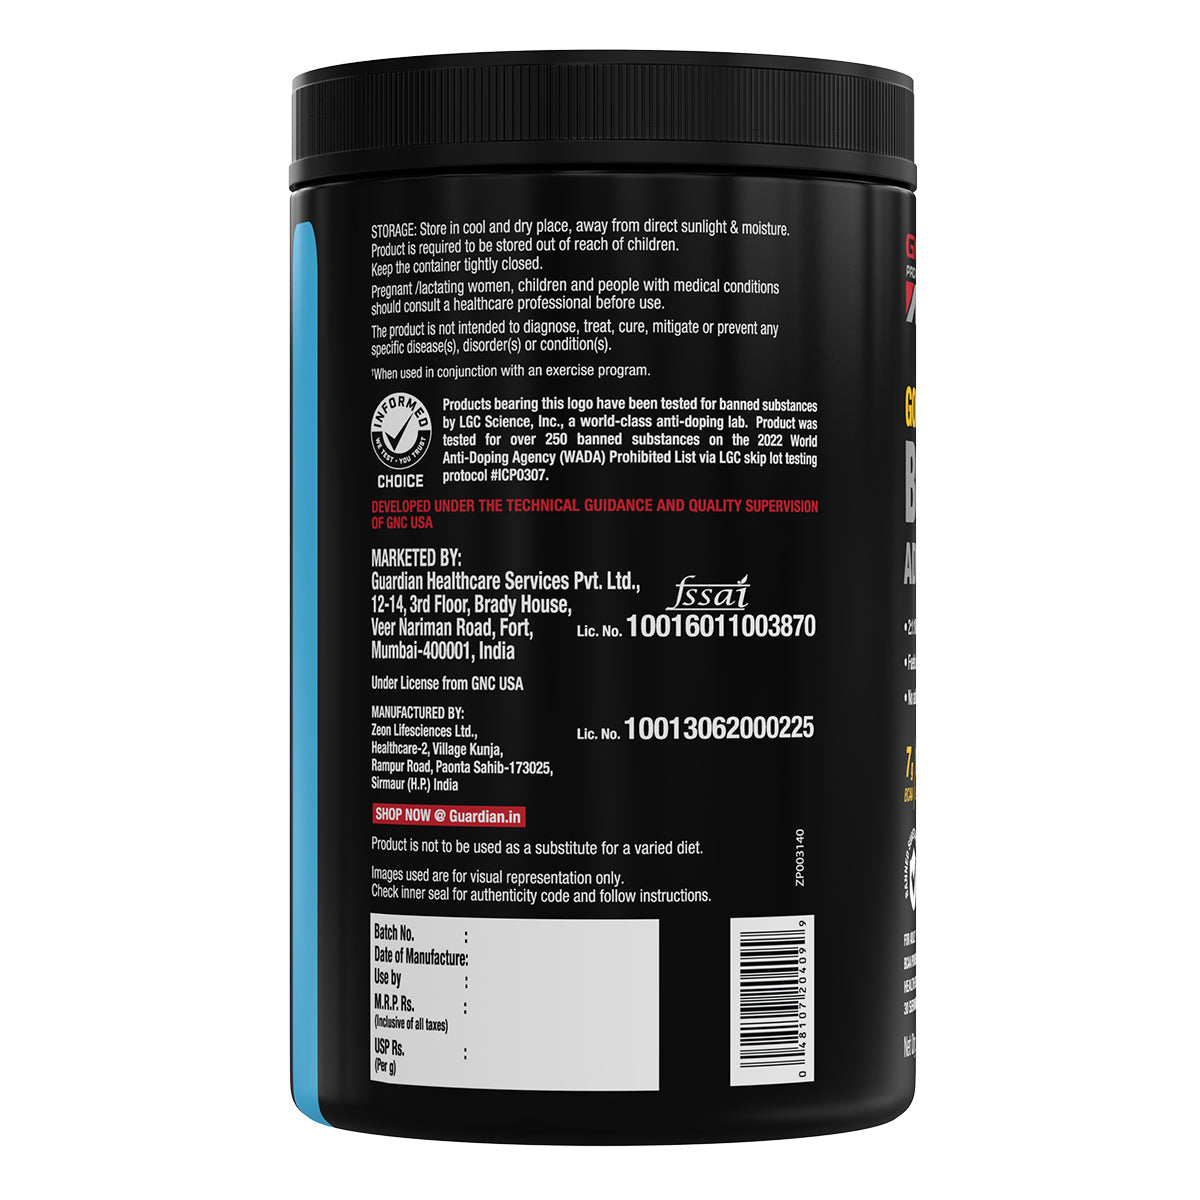 GNC AMP Gold Series BCAA Advanced - Clearance Sale - Fuels Lean Muscle Strength & Recovery | Informed Choice Certified | 400g | 30 Servings